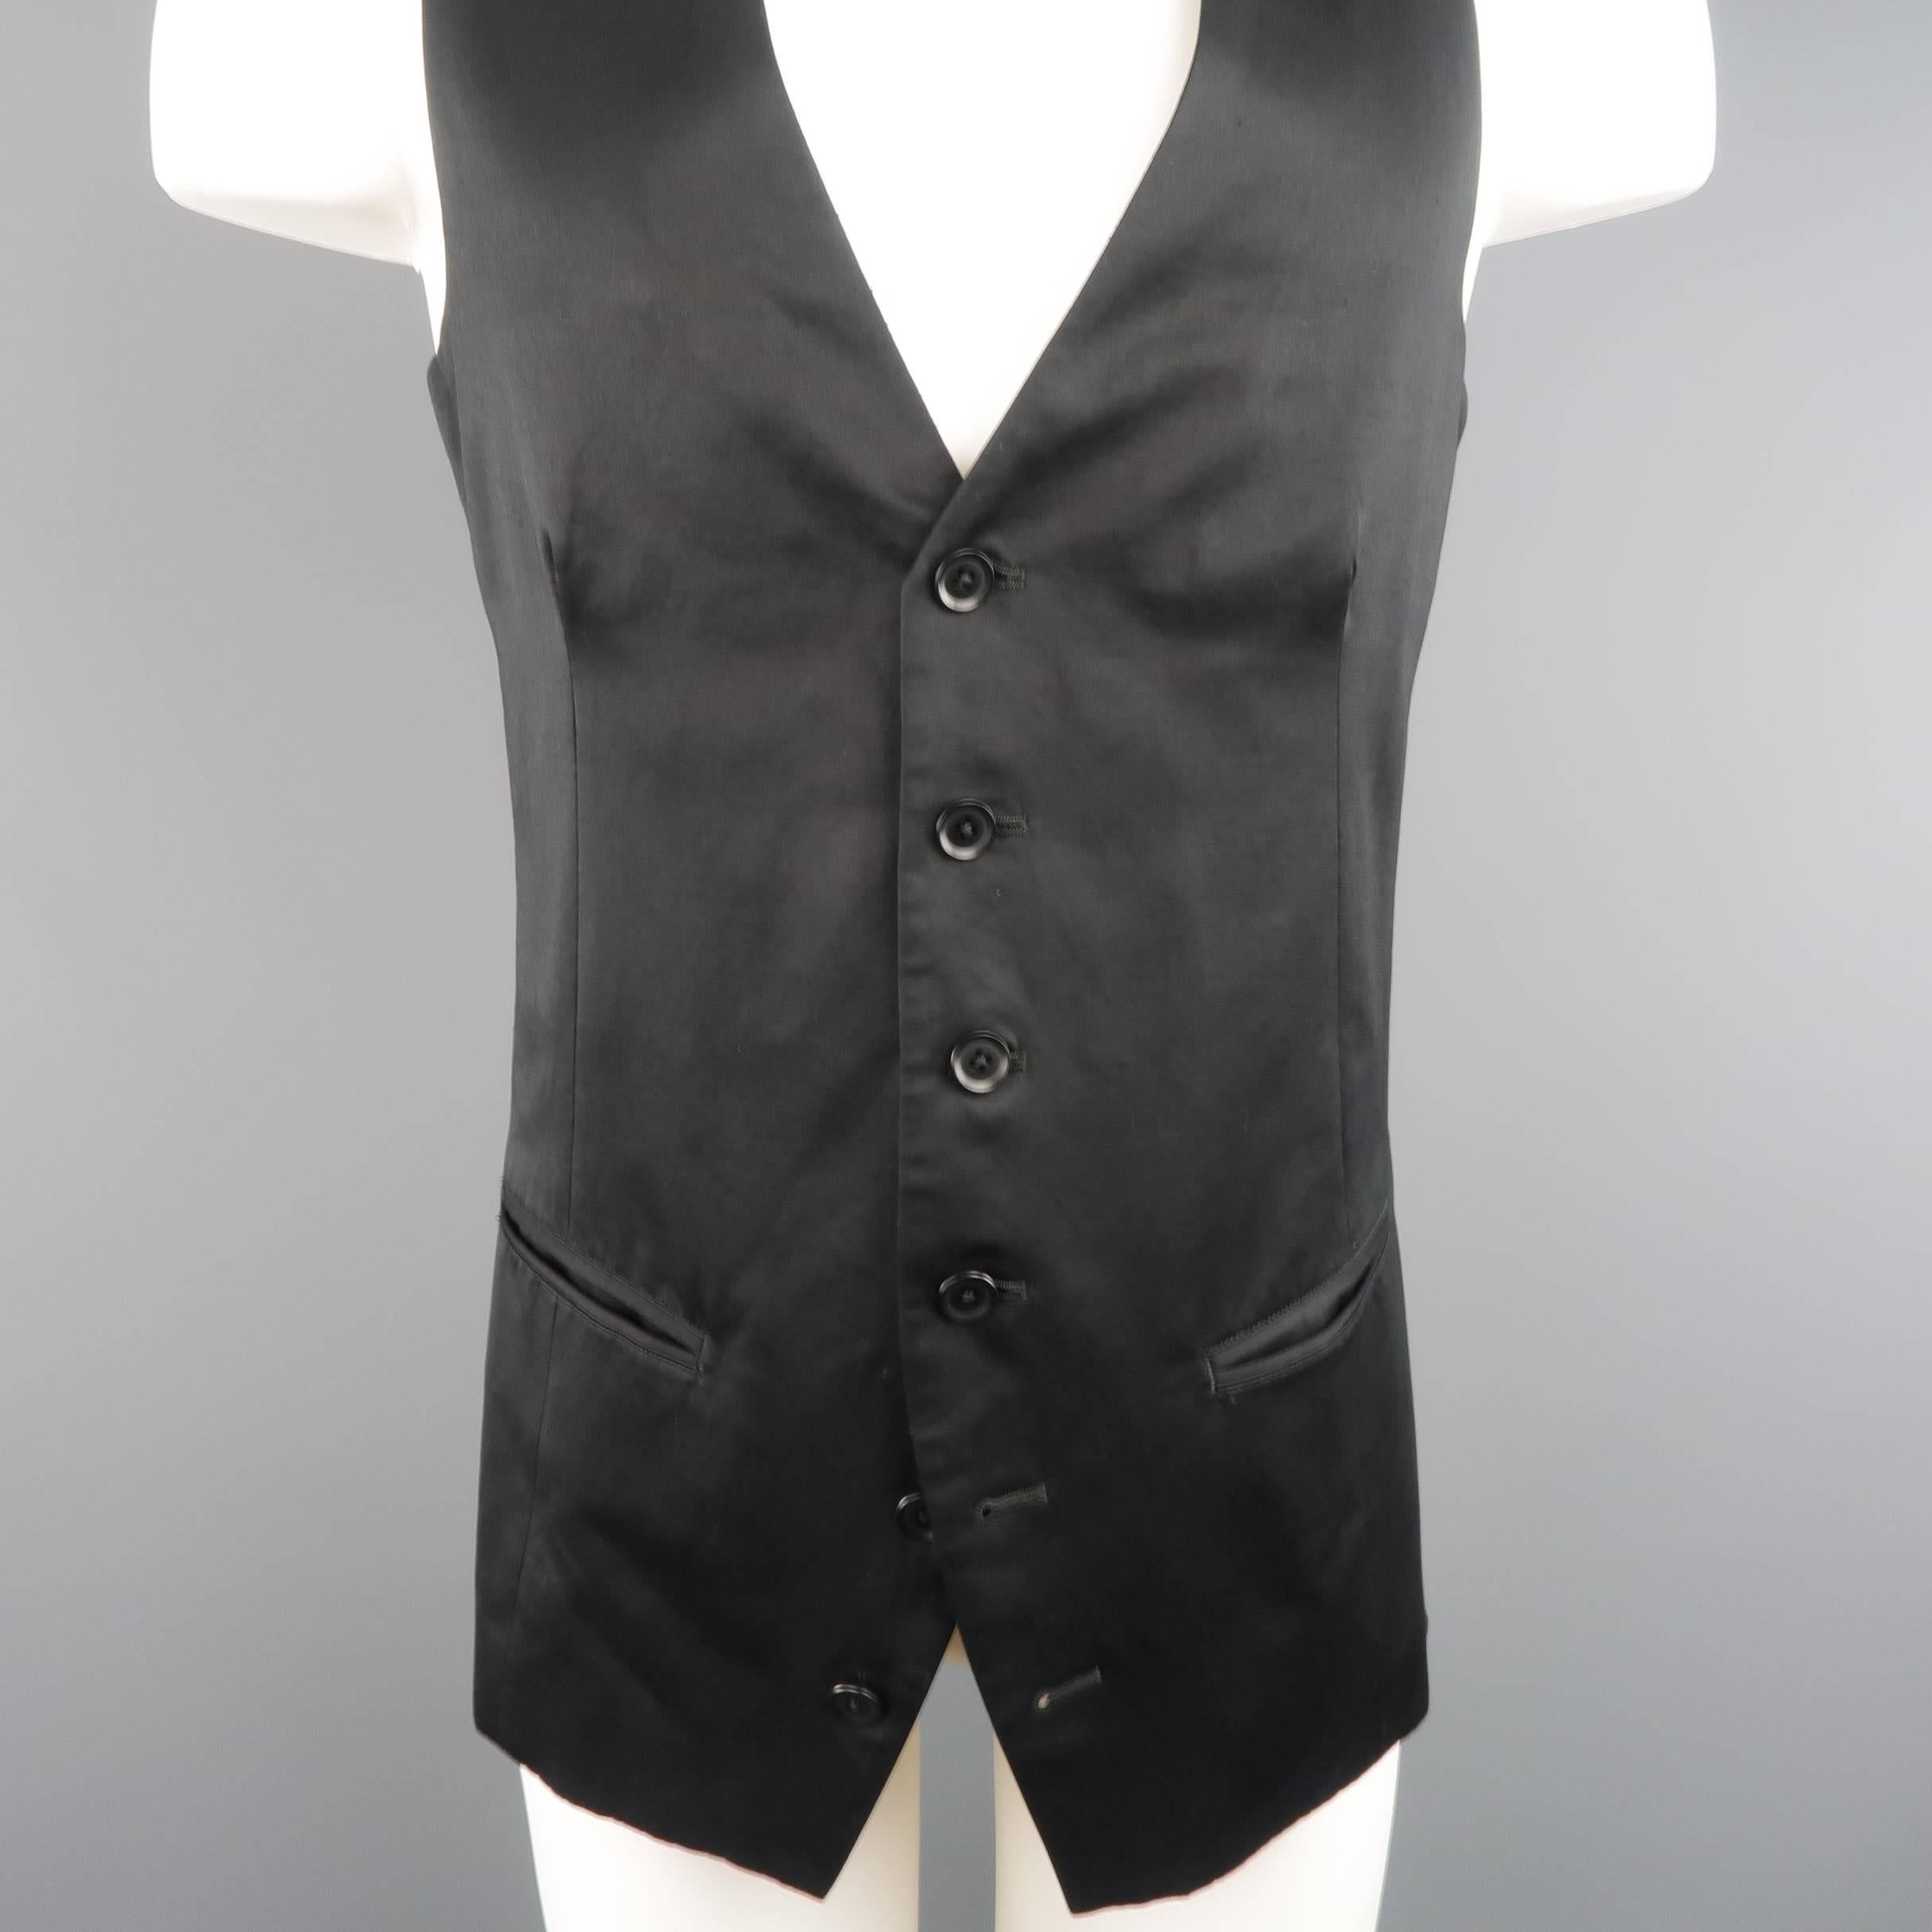 YOHJI YAMAMOTO Pour Homme Vest comes in black cotton linen and features a V neck, button up front with cropped hem back in patchwork brocade. Made in Japan.
 
Good Pre-Owned Condition.
Marked: JP 3
 
Measurements:
 
Shoulder: 12.95 in.
Chest: 41